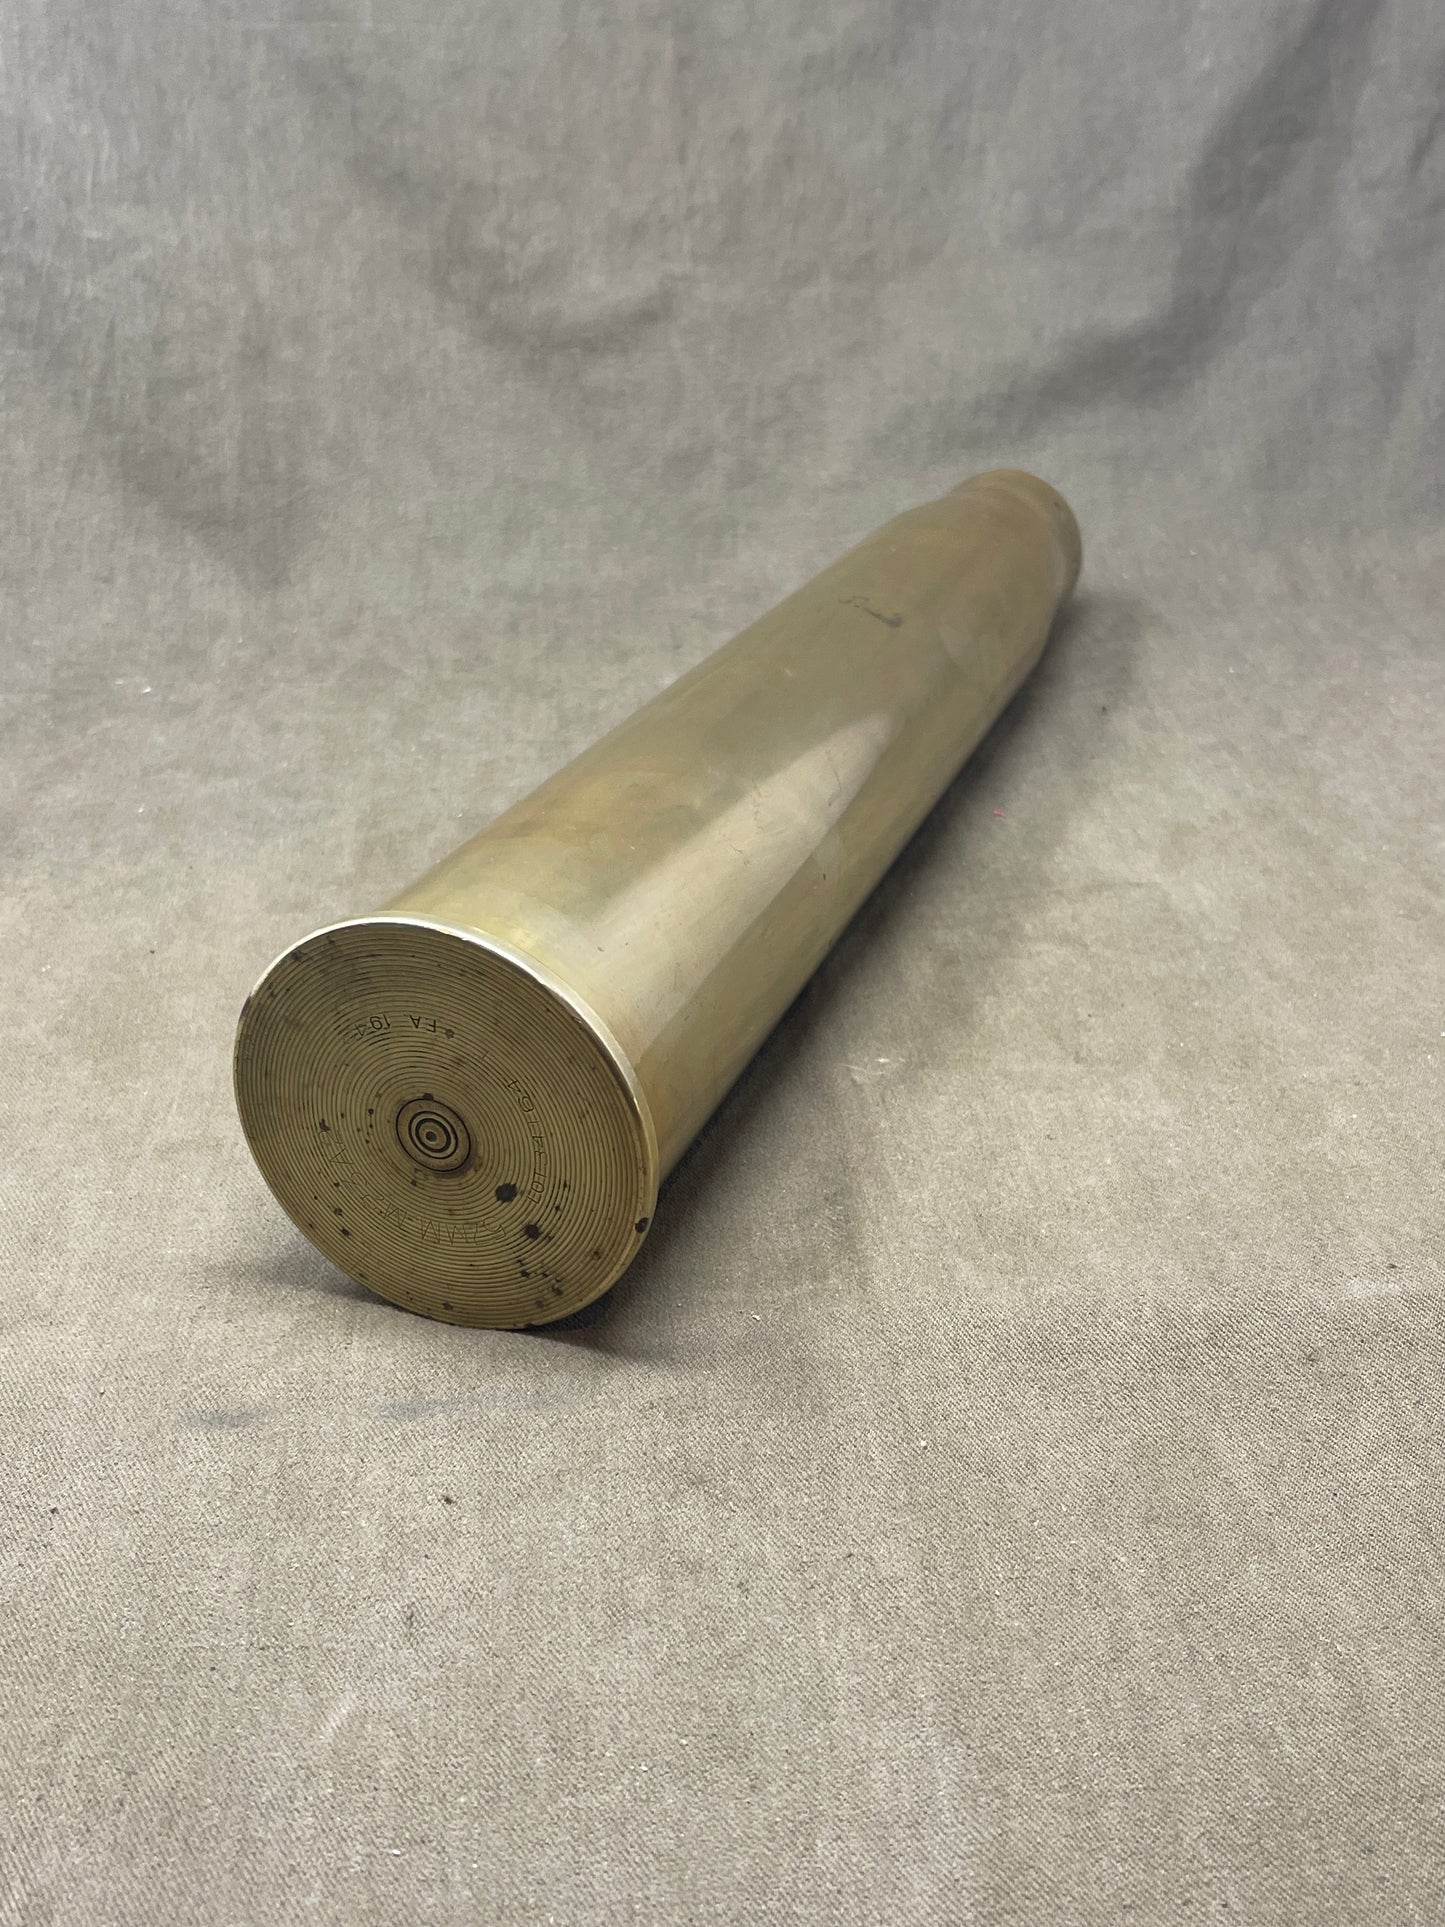 57mm M23A2 Shell Case  F.A 1942 Dated